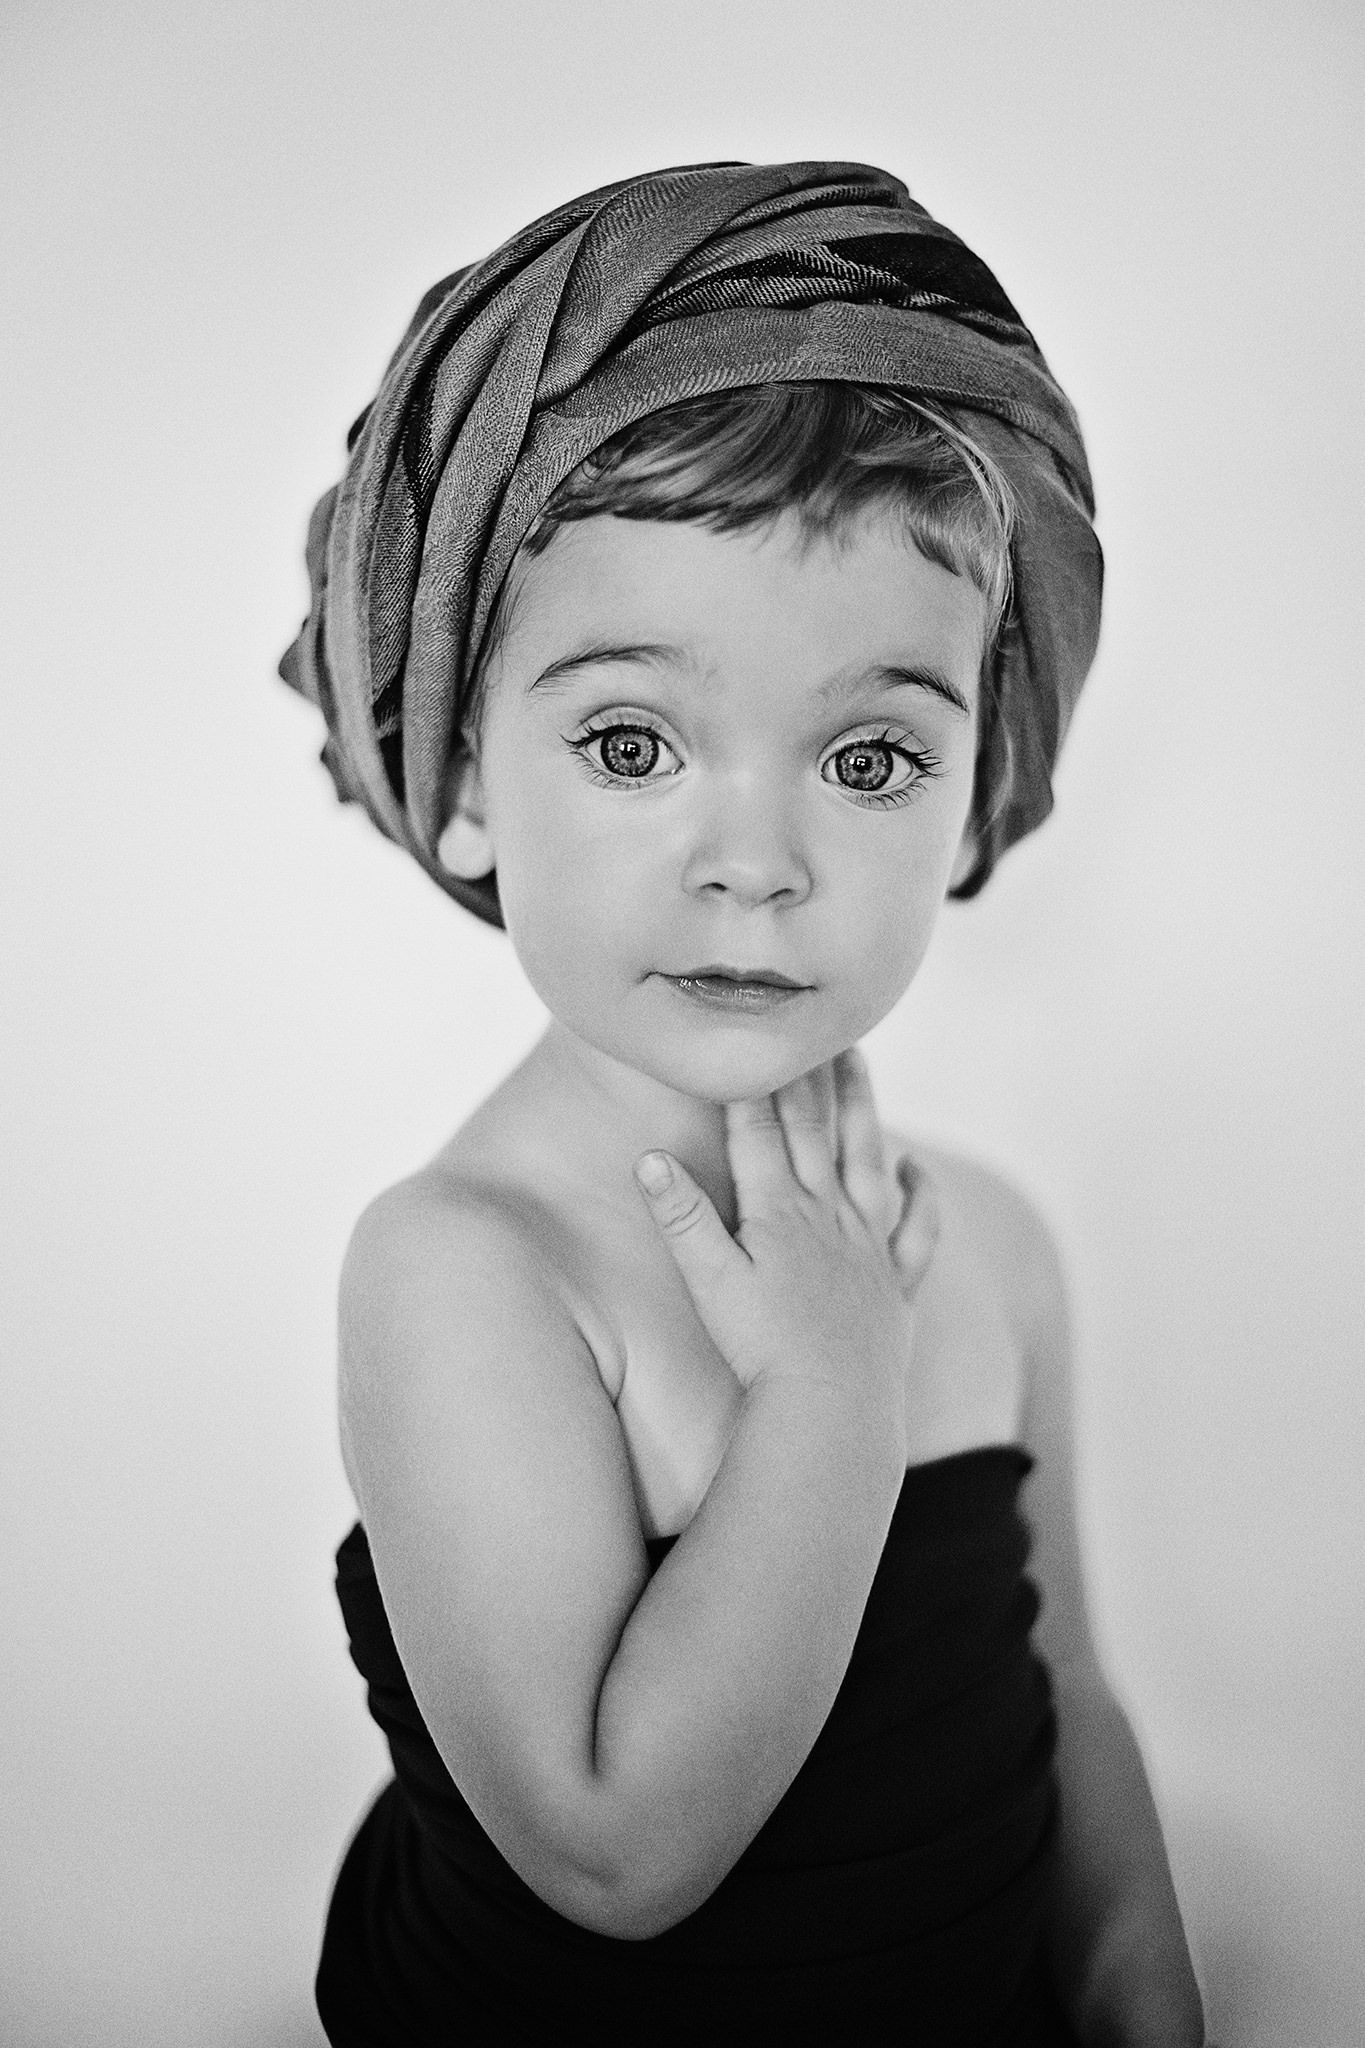 Black And White Photography Portraits - The Best You've Ever Seen! - Black And White Photography Portraits - The Best You've Ever Seen! -   18 beauty Images black and white ideas